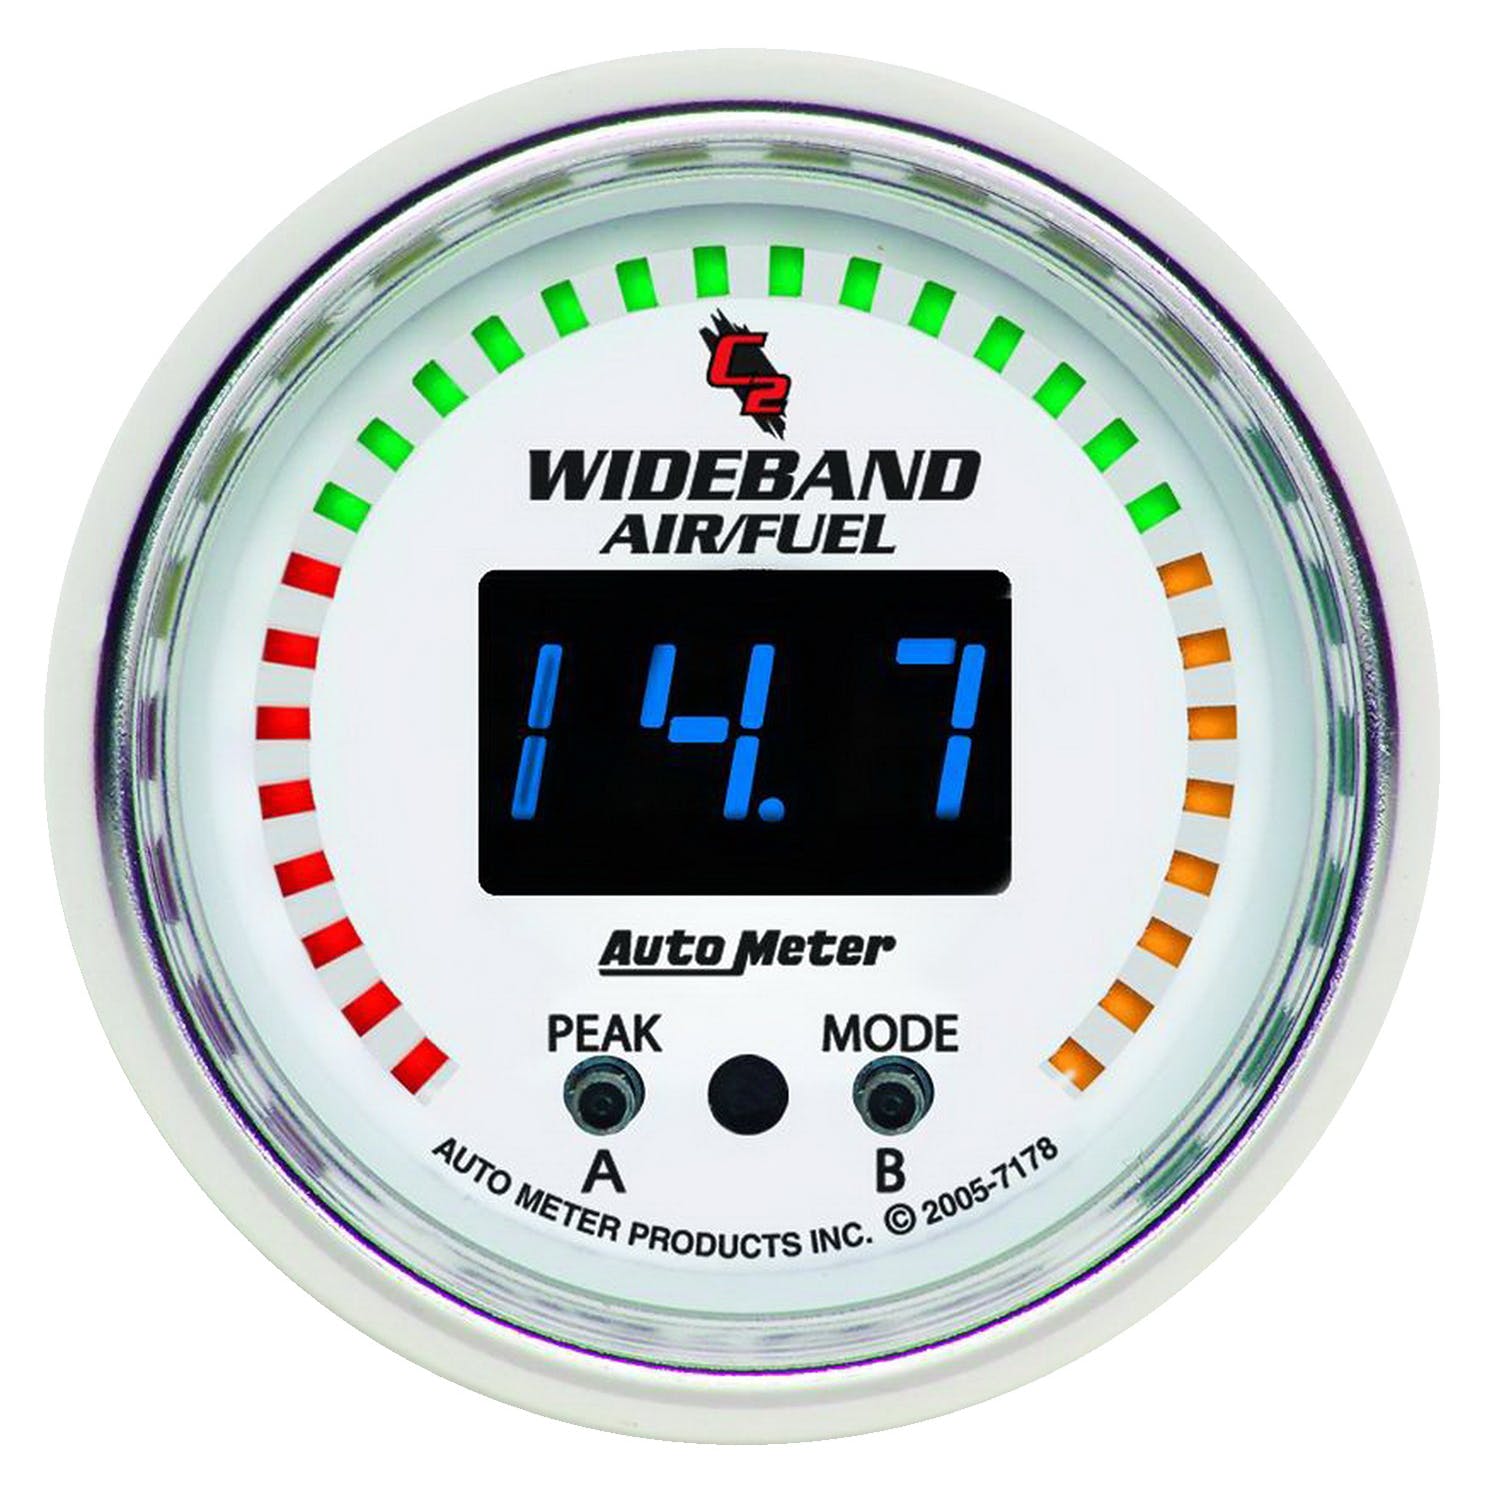 AutoMeter Products 7178 Air Fuel Ratio - Wide Band